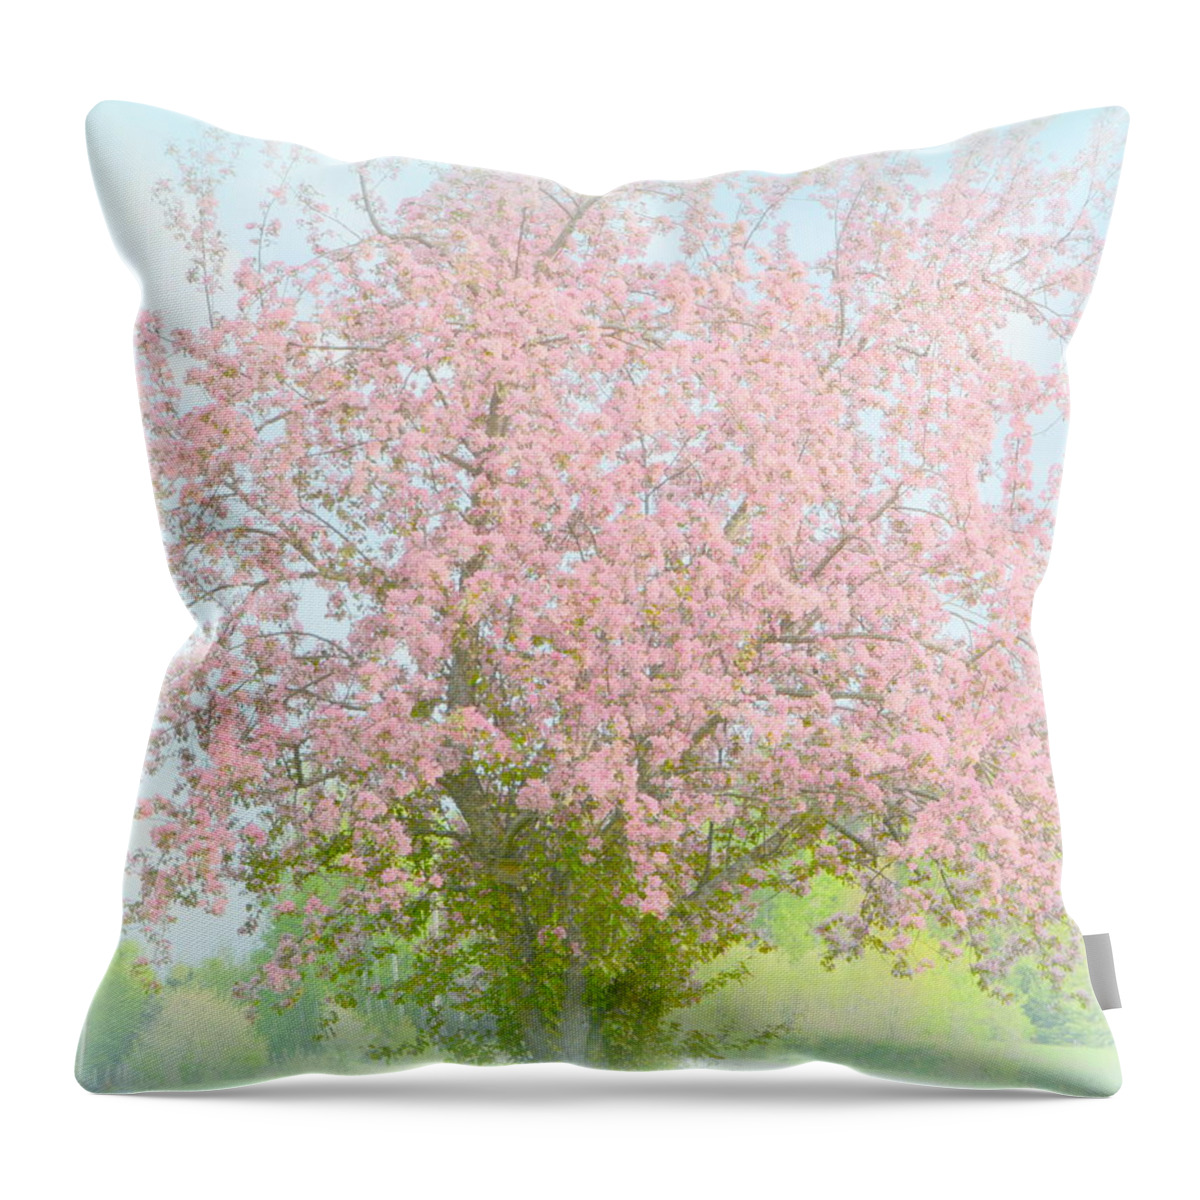 Blossom Throw Pillow featuring the photograph Blossoms by Kimberly Woyak